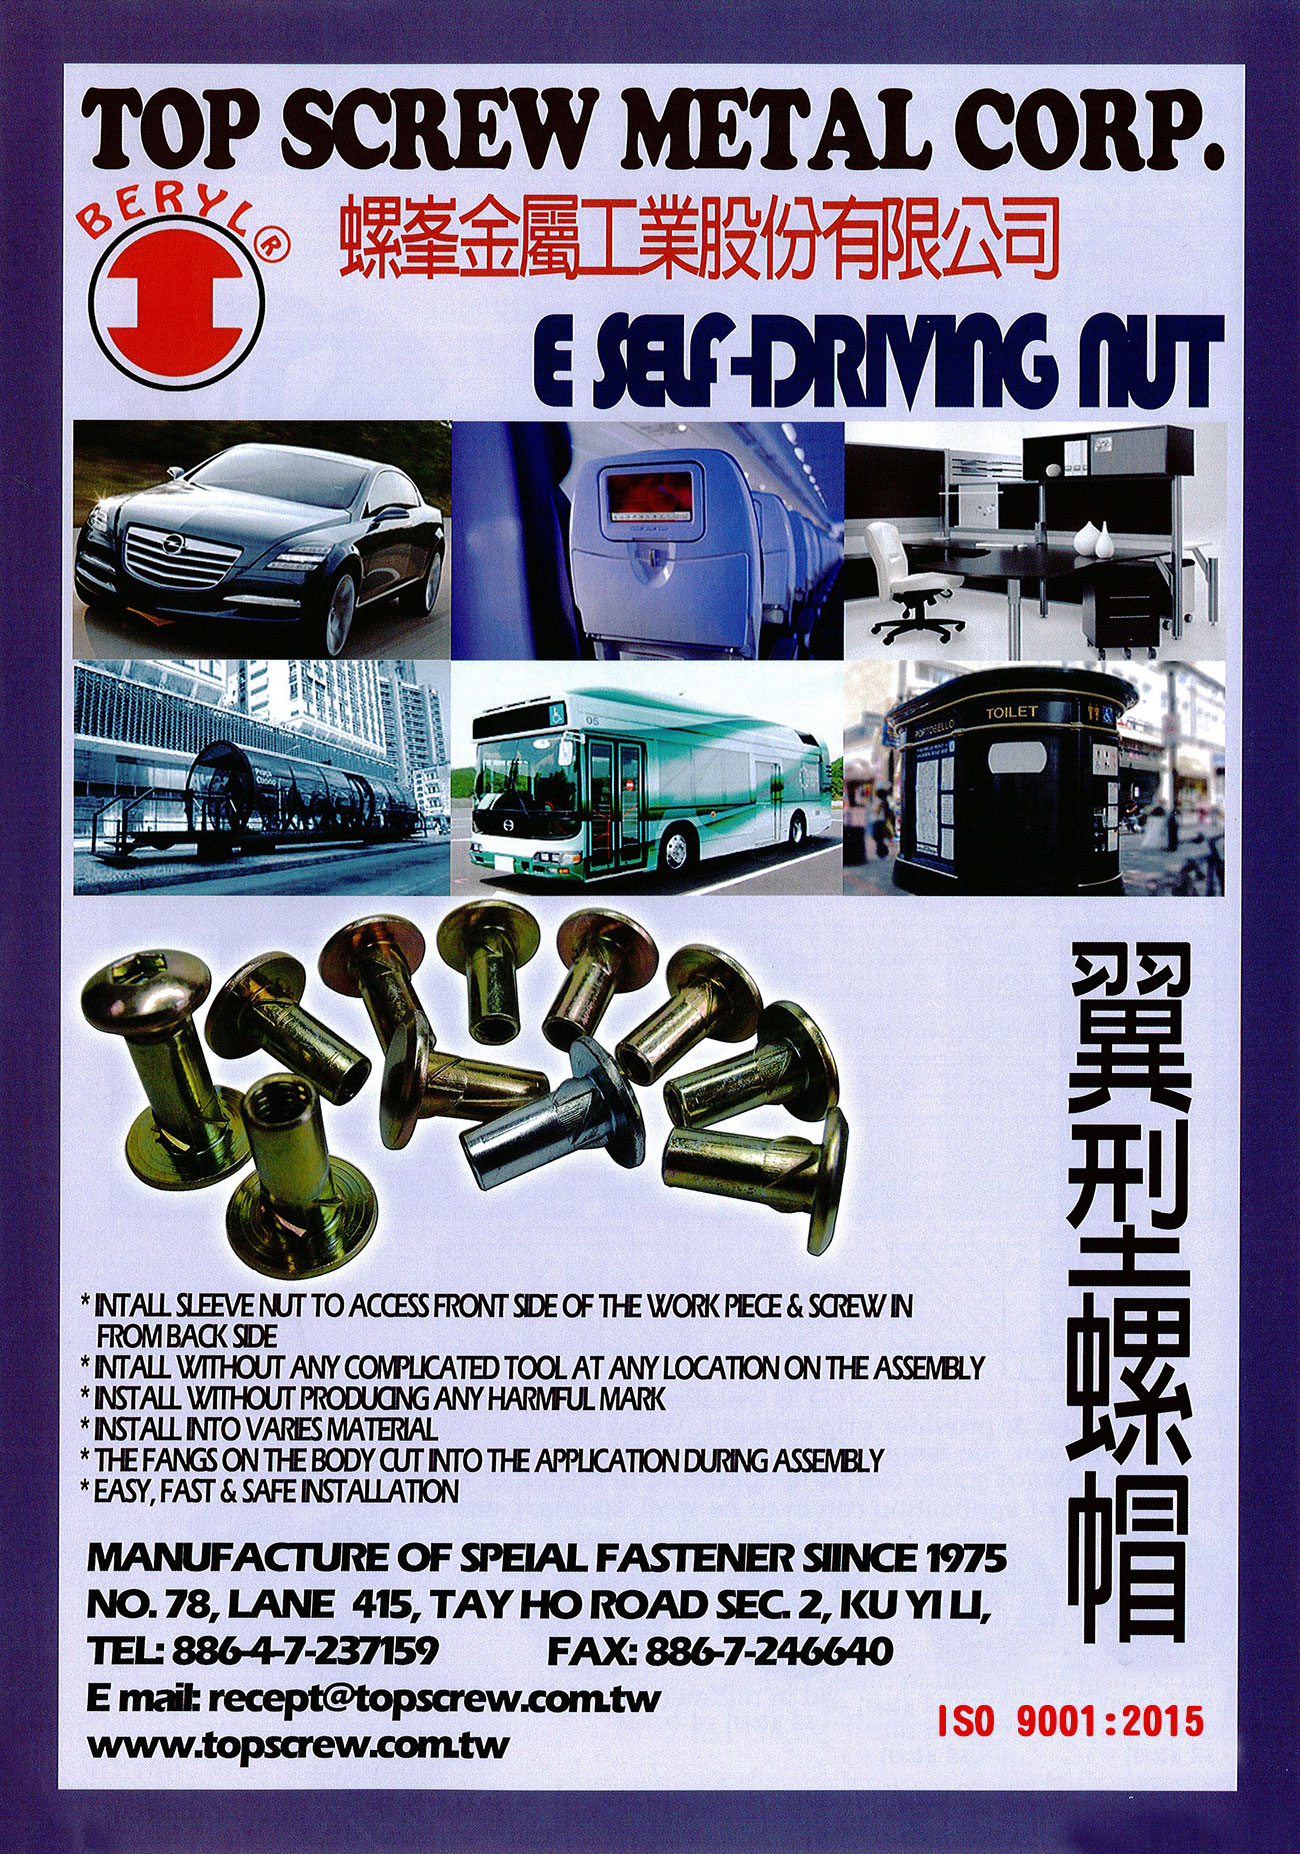 e self-driving nut,sex bolts,sleeve nut,security fastener,top screw